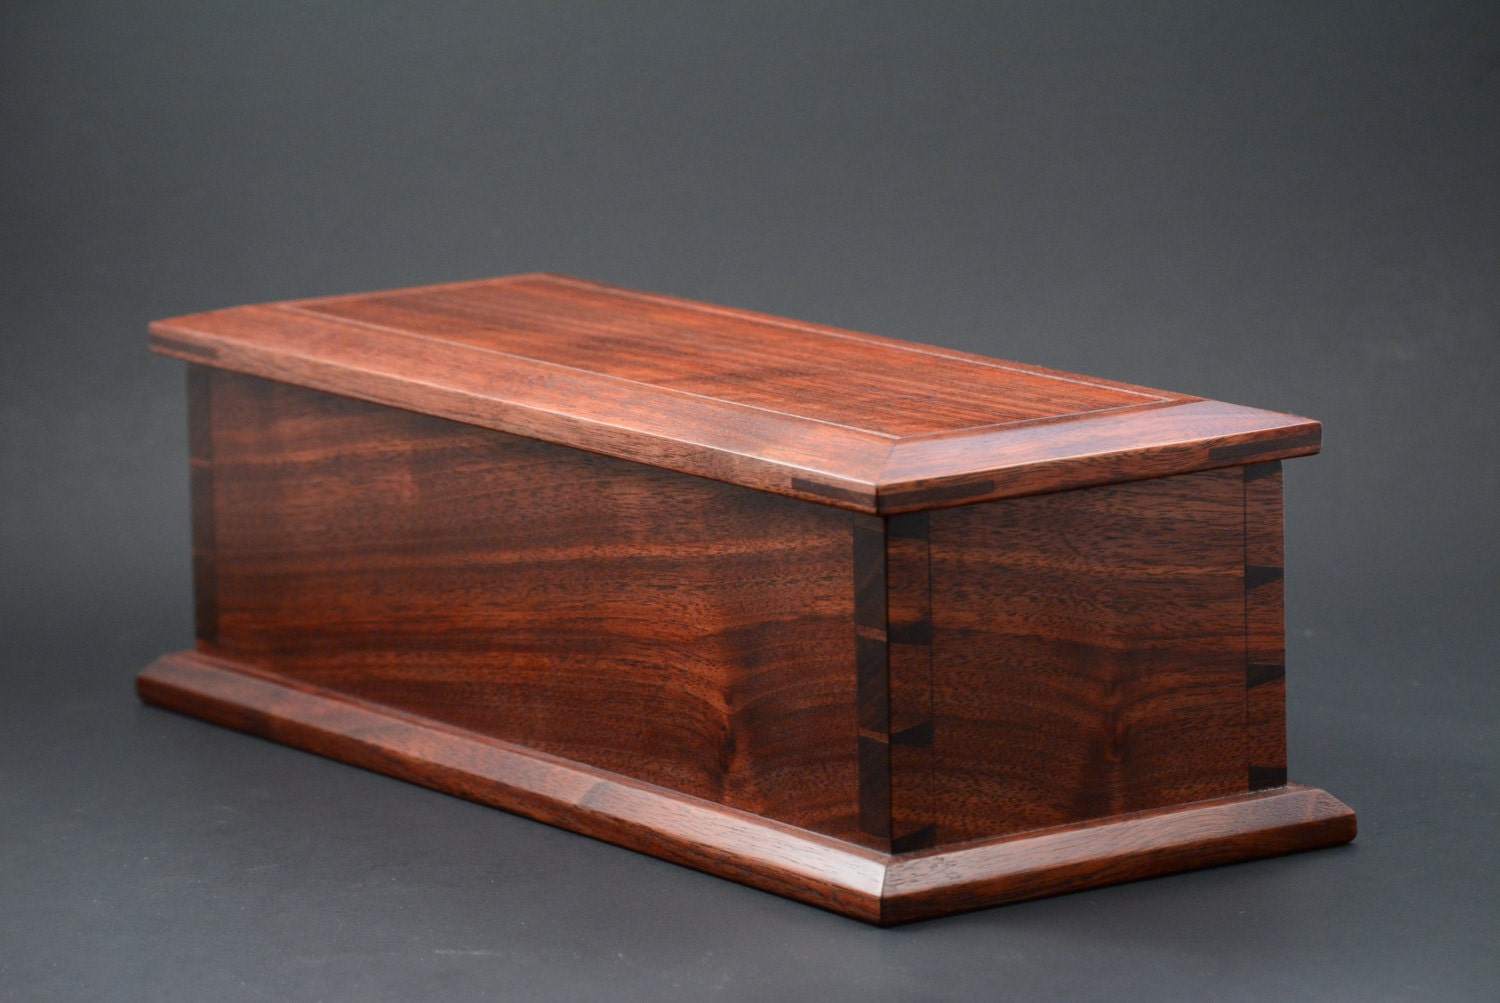 Wood dovetail box made in Walnut